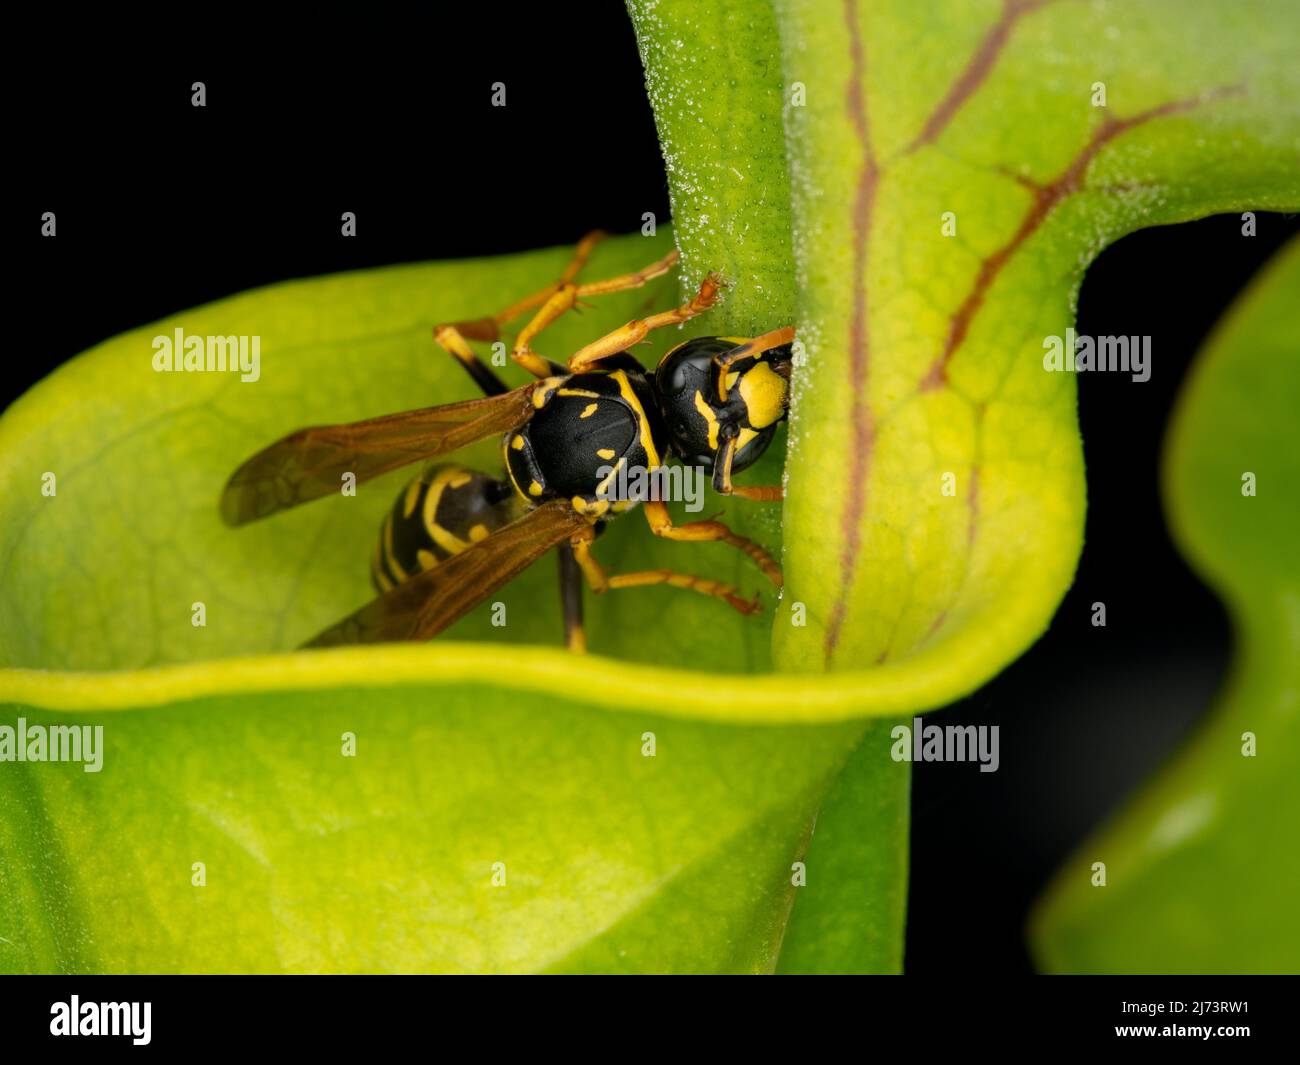 European paper wasp (Polistes dominula) drinking tiny nectar droplets secreted by a yellow pitcher plant (Sarracenia flava) Stock Photo